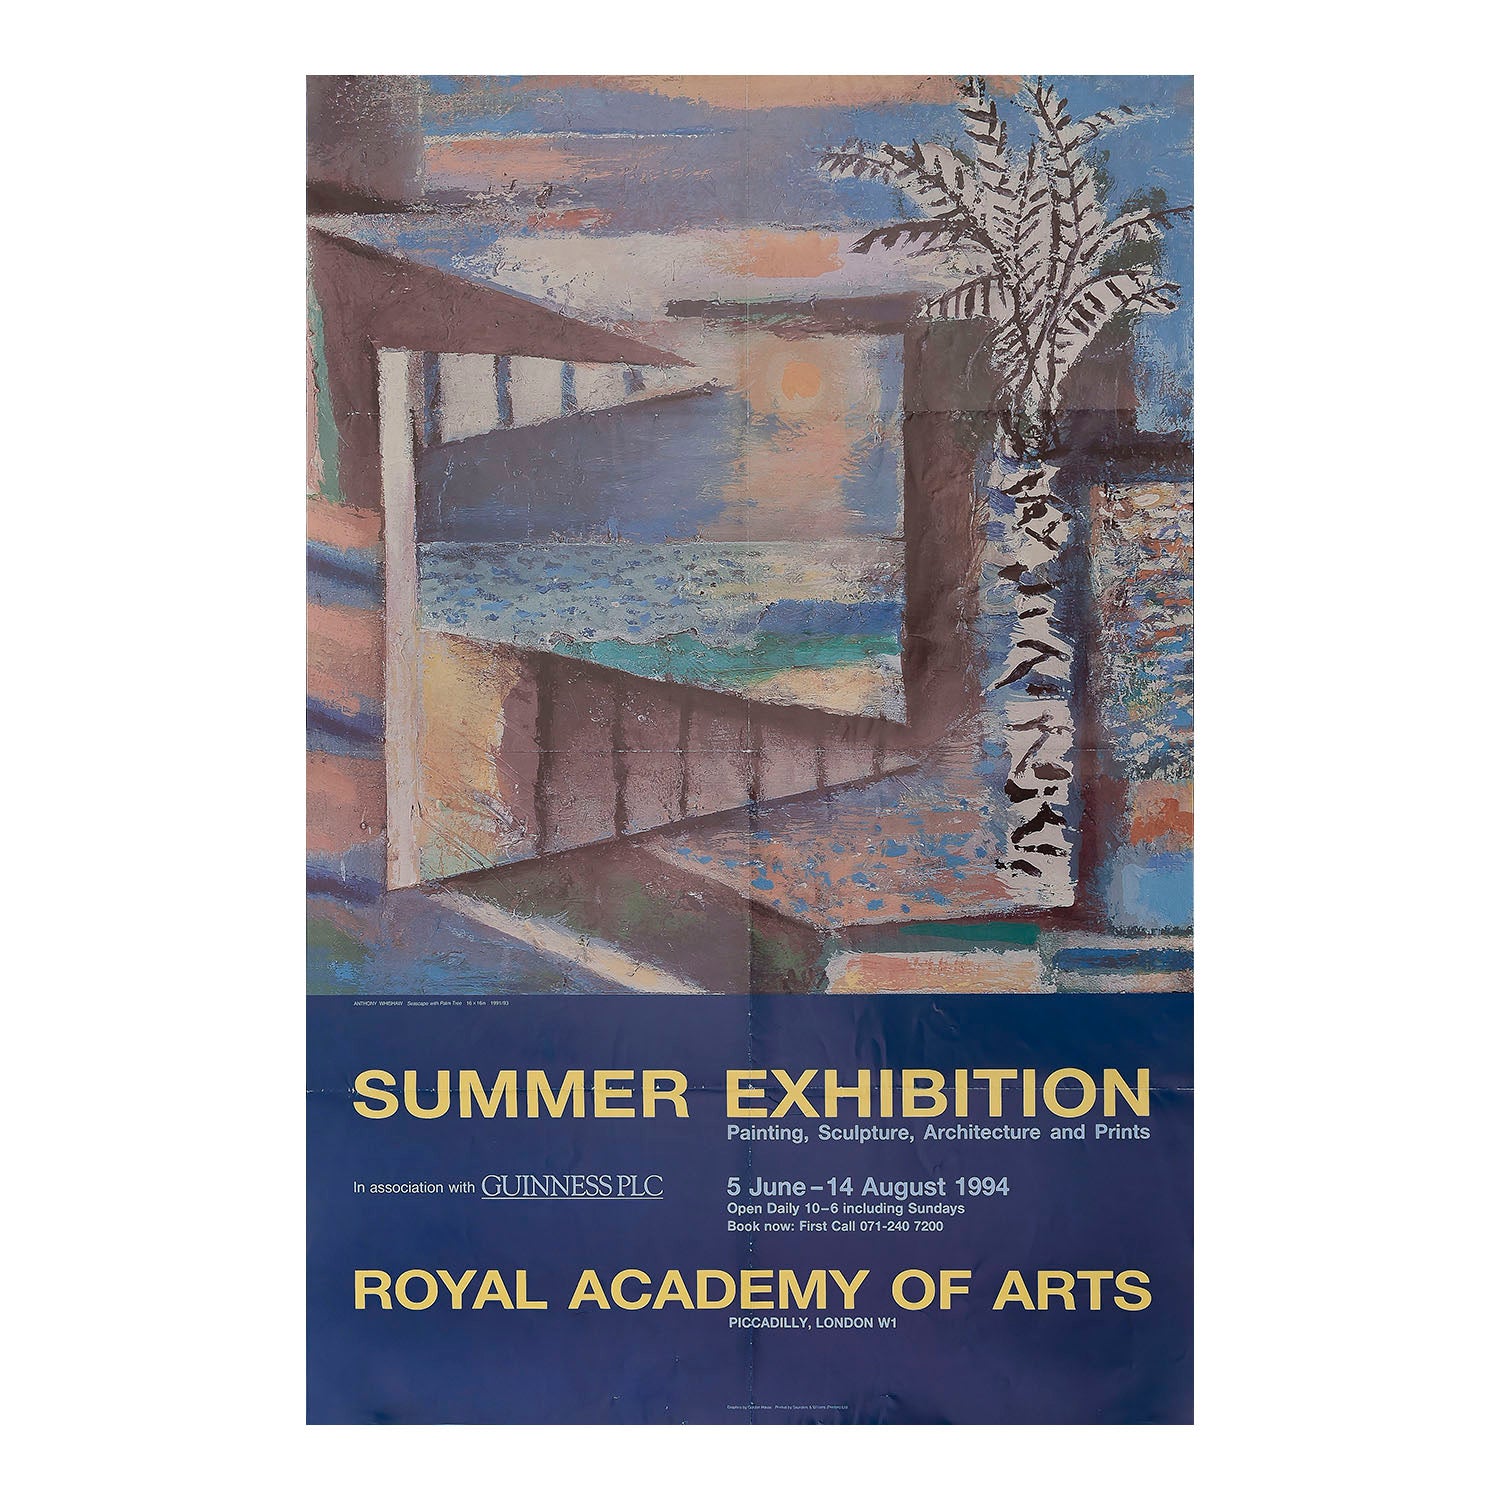 original poster, for the Royal Academy Summer Exhibition in 1994 featuring an original artwork by Anthony Wishaw RA, Seascape with Palm Trees, with layout design by Gordon House.